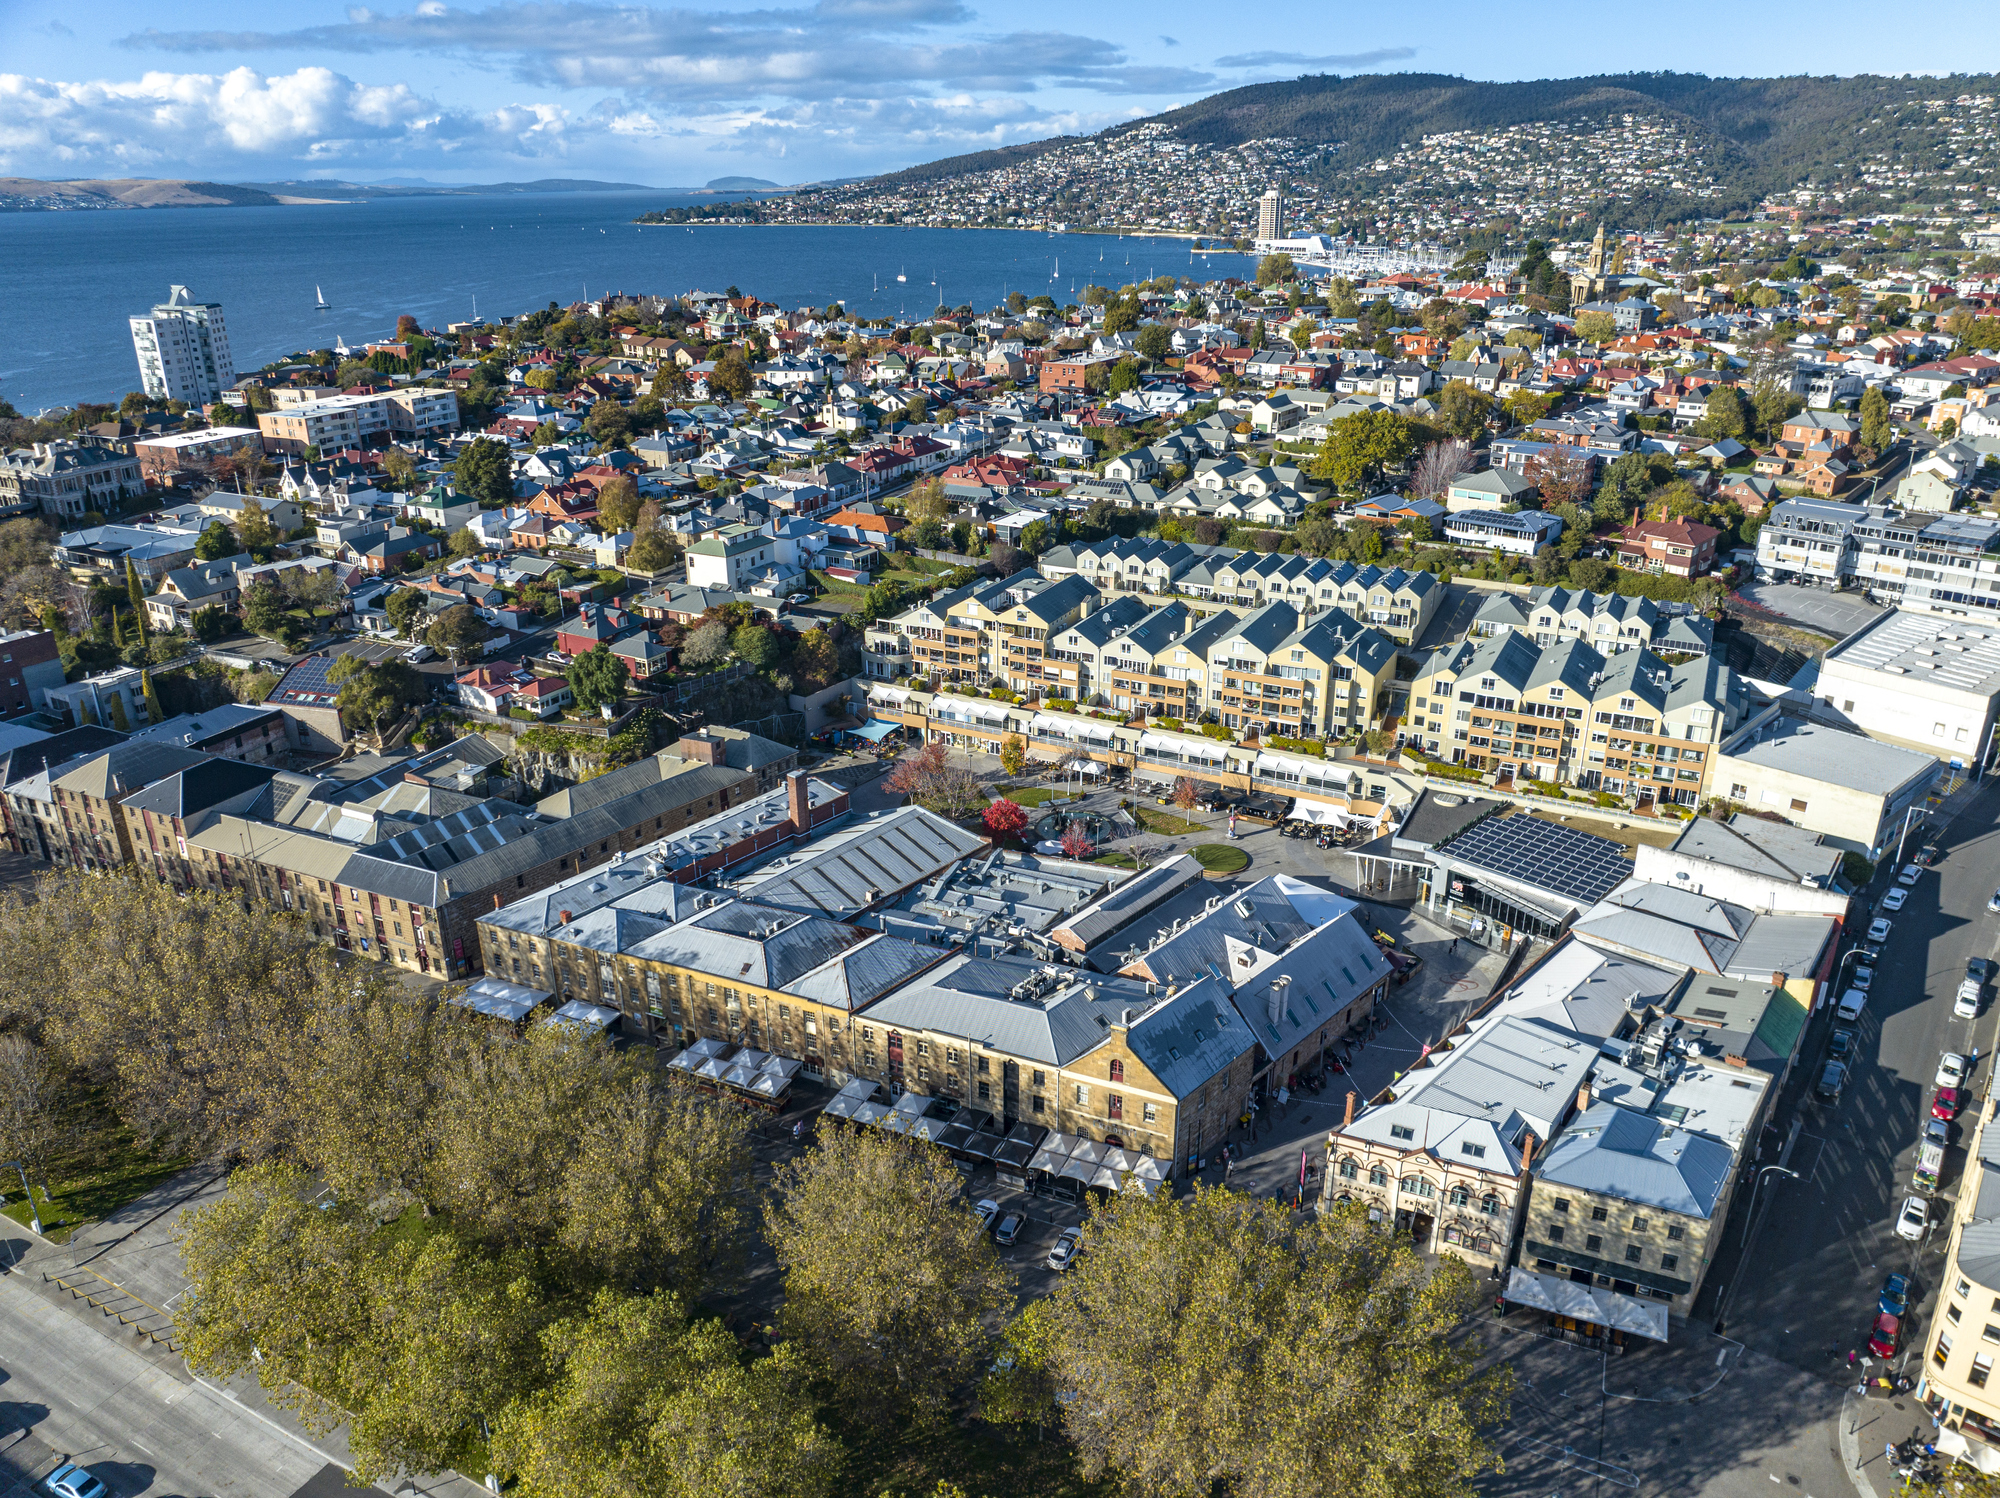 Hobart's Battery Point recorded the second highest number of 'green' listings in FY23, with 90.9 percent of properties for sale advertising their environmentally friendly features. Credit:	AngryBird/Getty Images